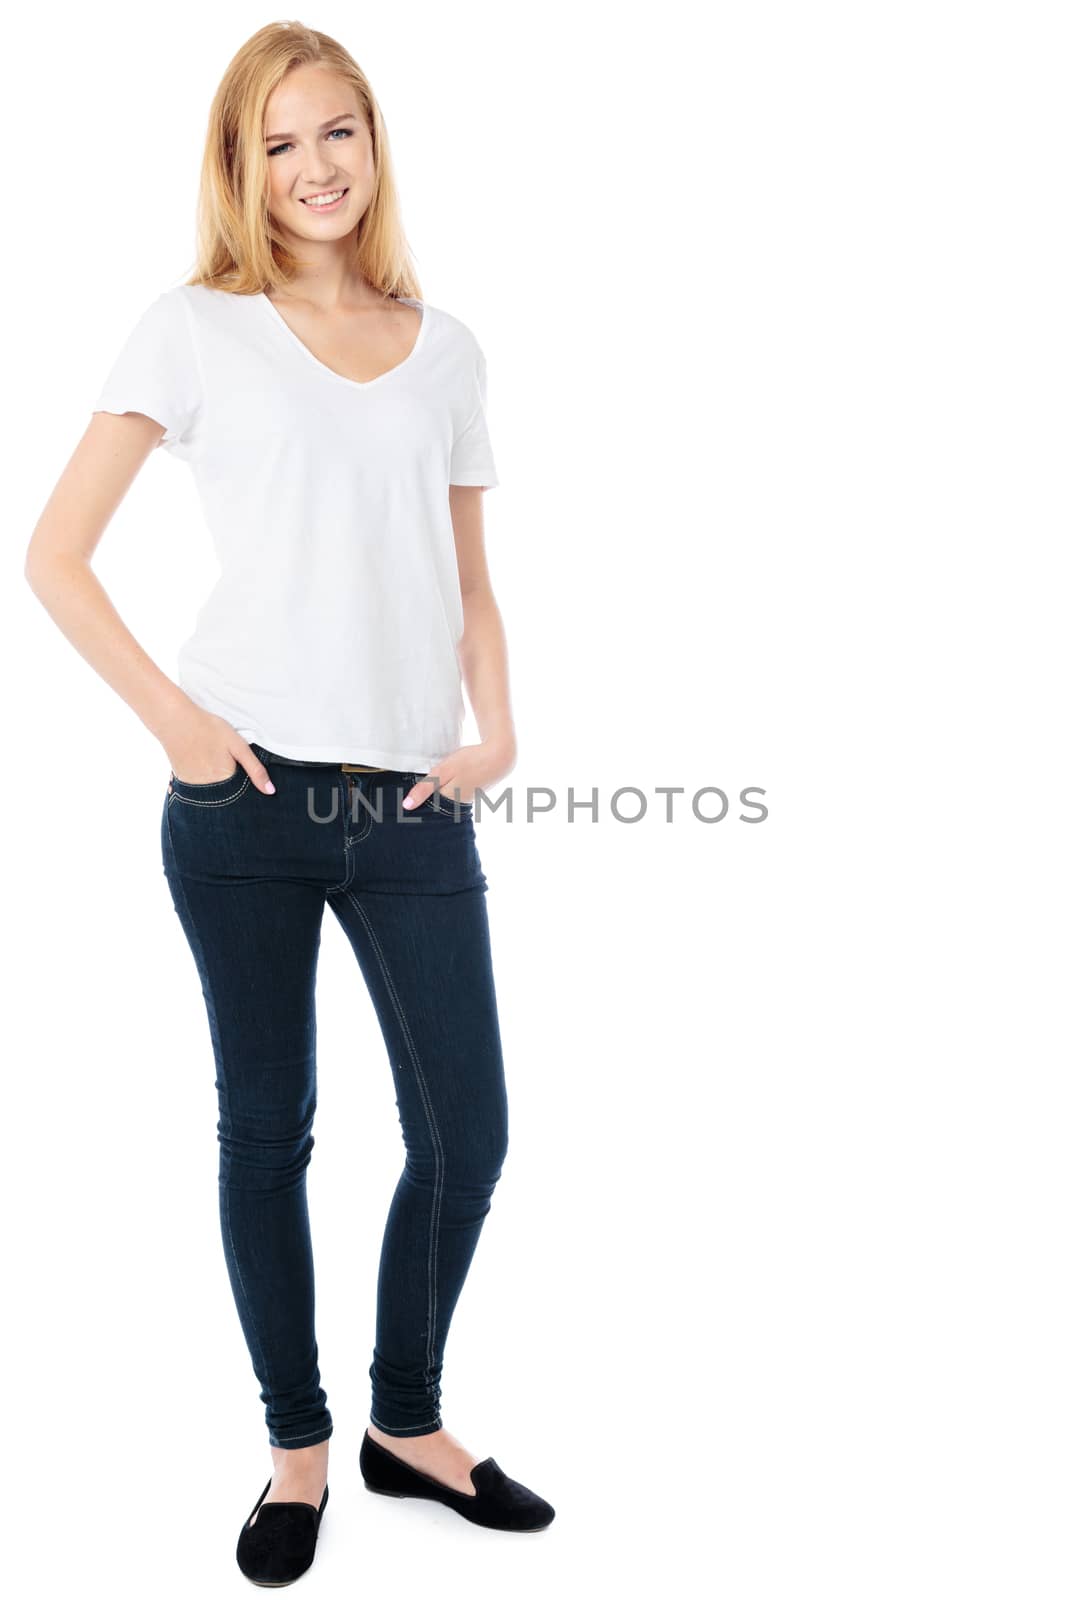 Slender friendly young woman in trendy jeans standing relaxing with her hands in her pockets smiling at the camera, isolated on white